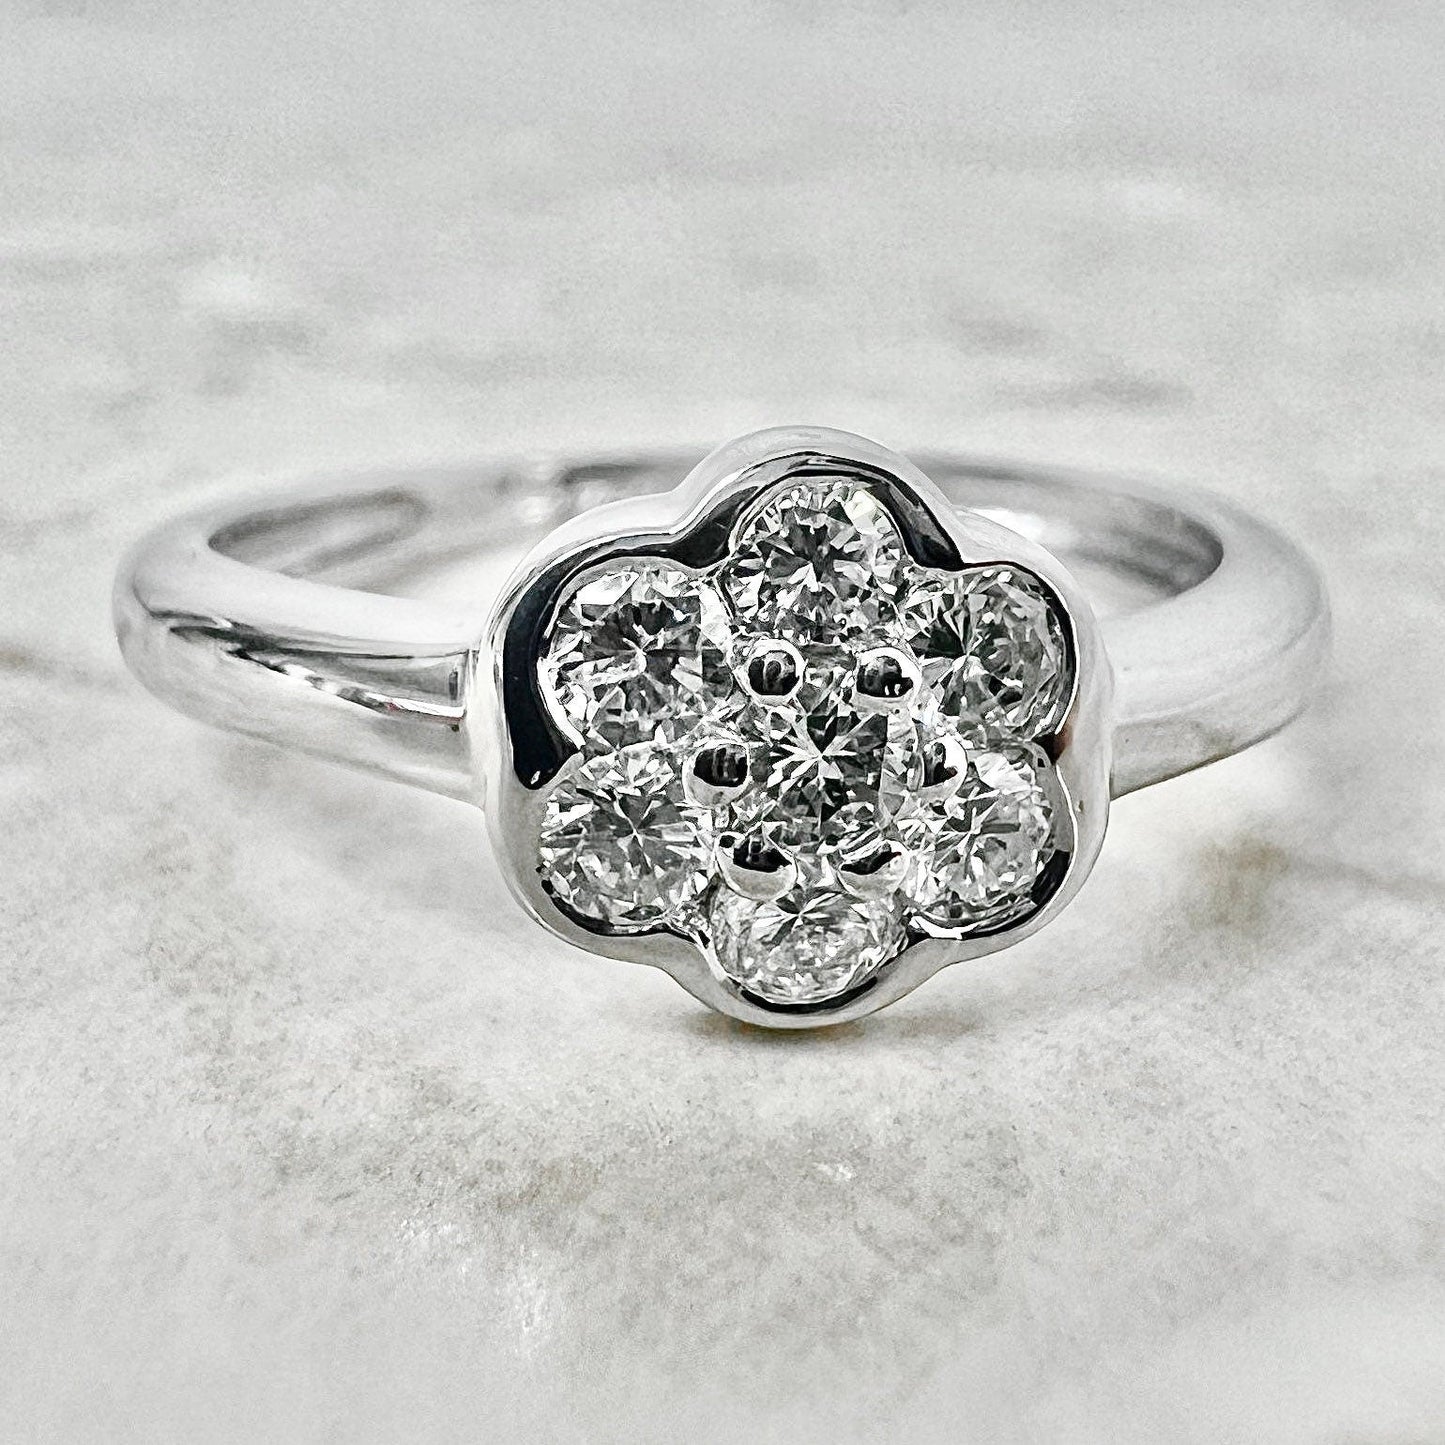 18K Diamond Cluster Ring - White Gold Diamond Cocktail Ring - Diamond Halo Ring - Anniversary Ring - Engagement Ring - Best Gifts For Her